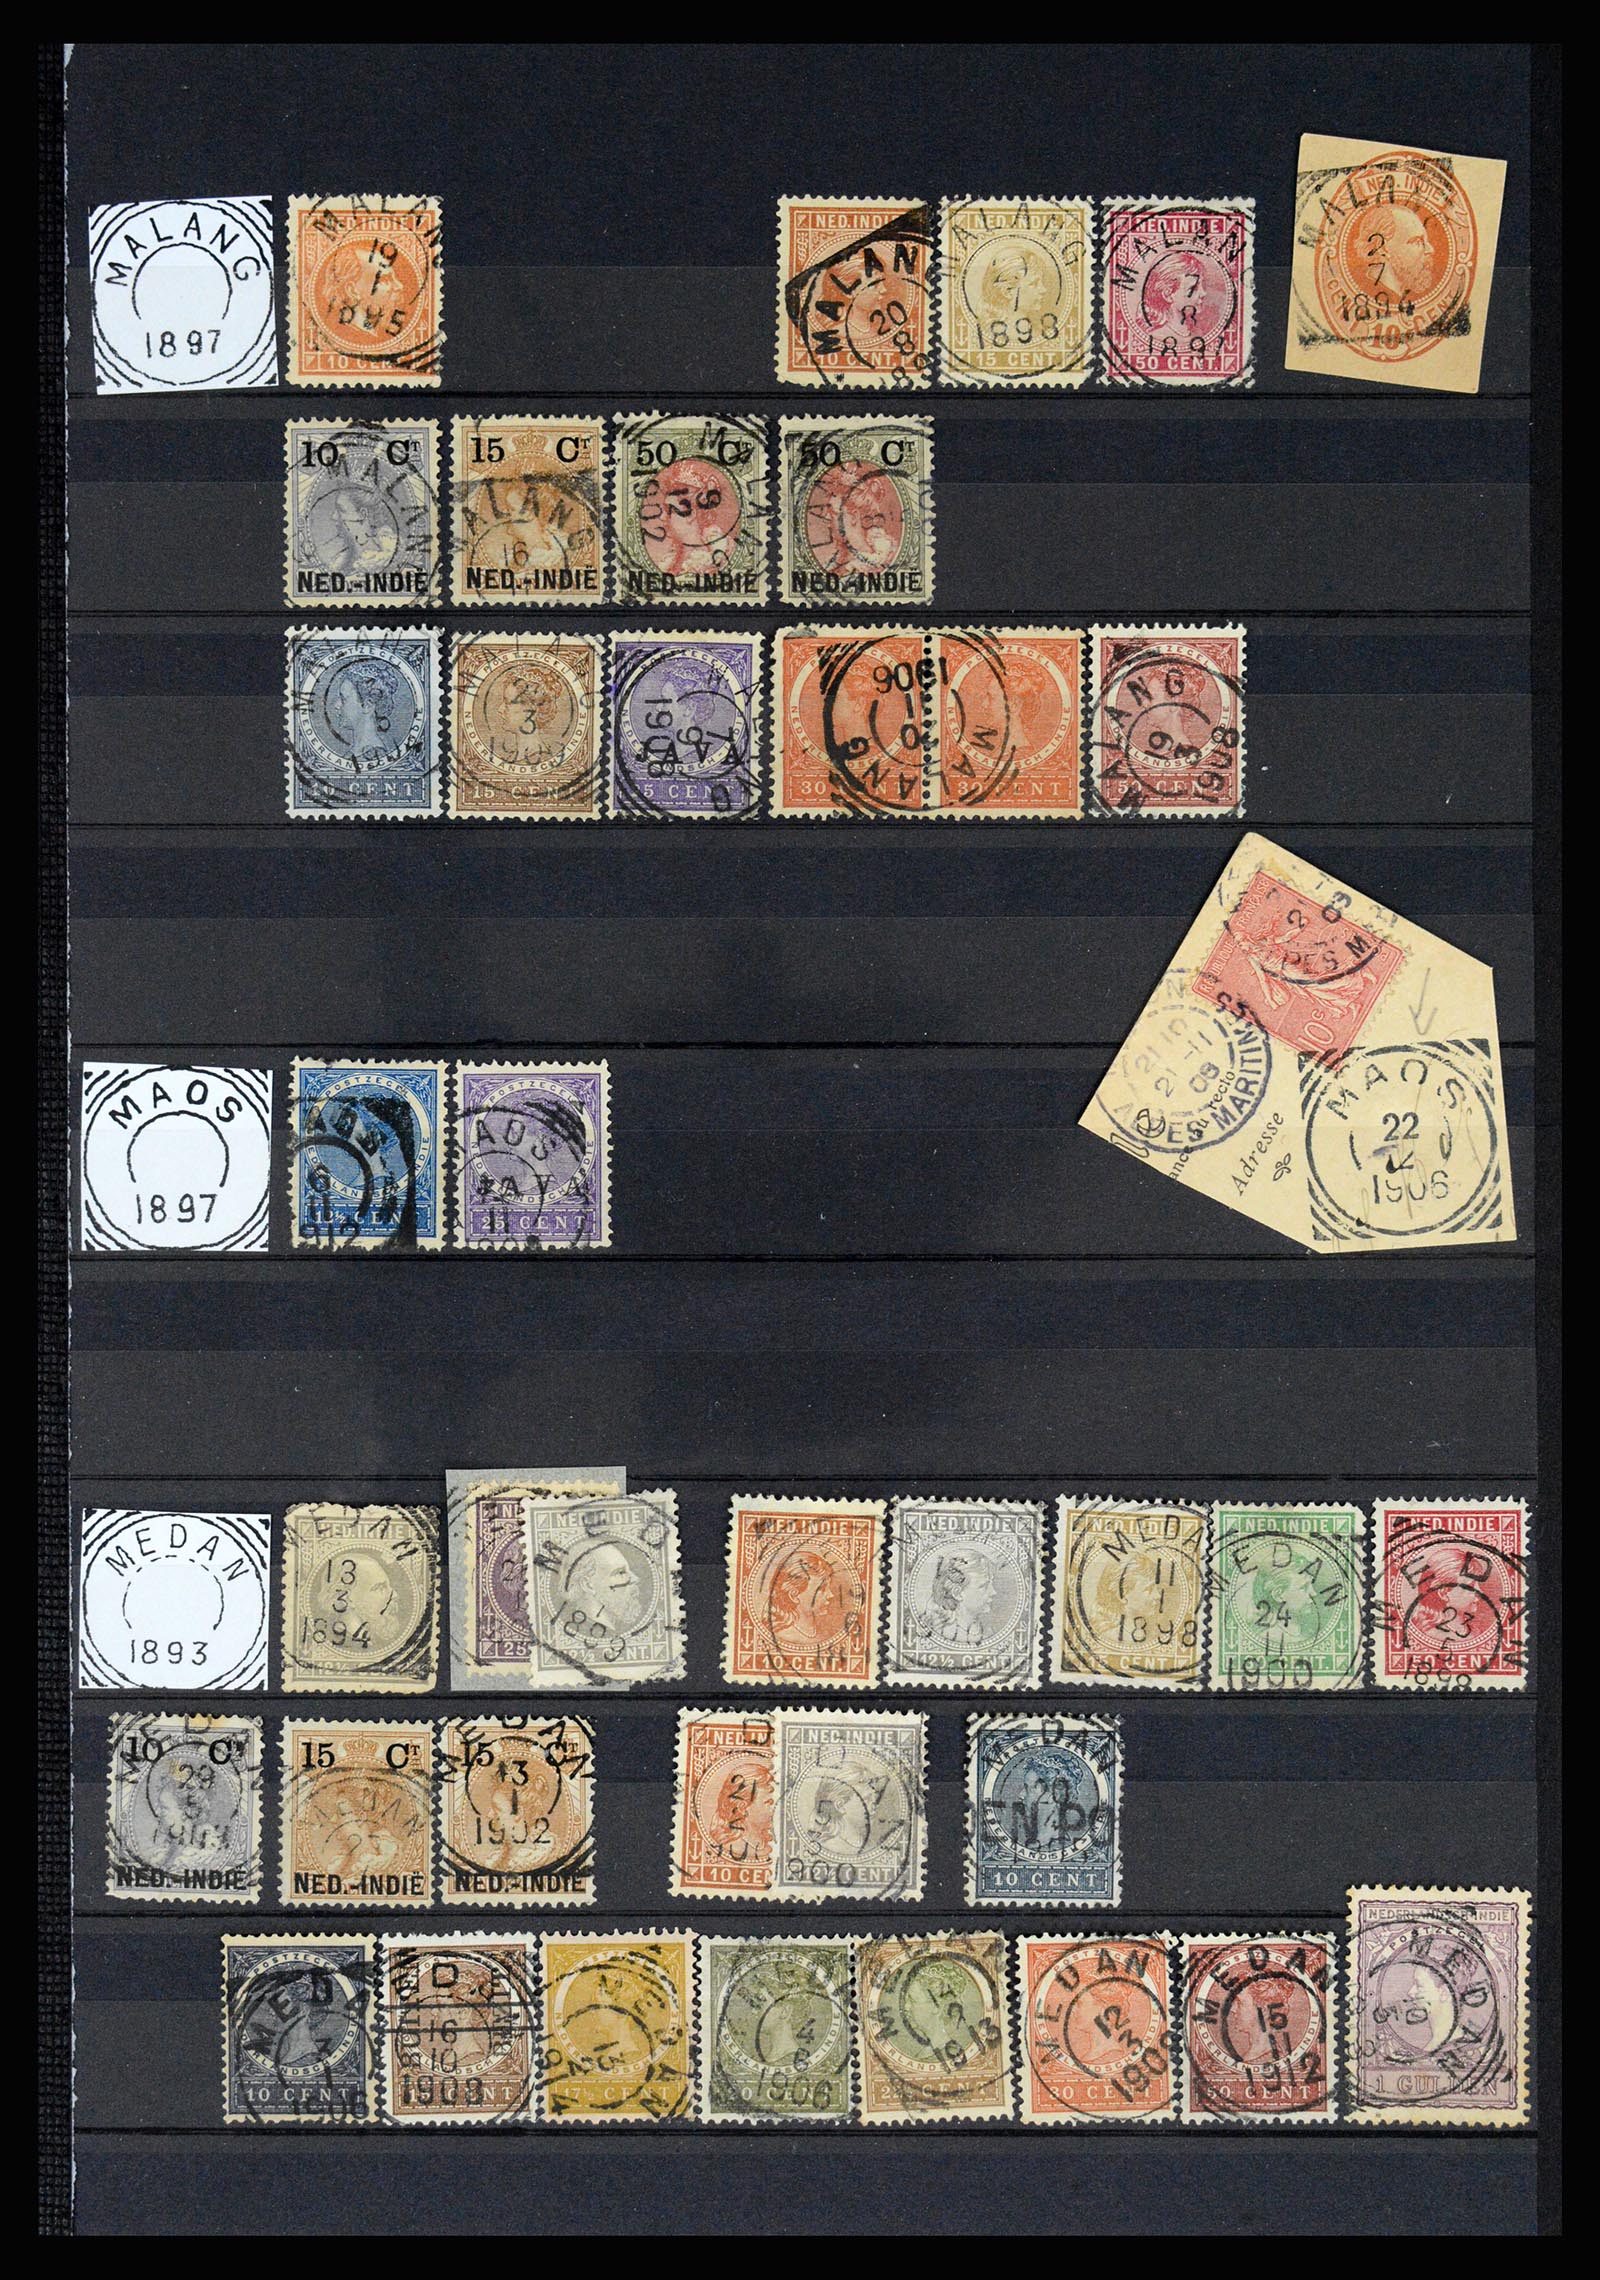 36839 028 - Stamp collection 36839 Dutch east Indies square cancels.